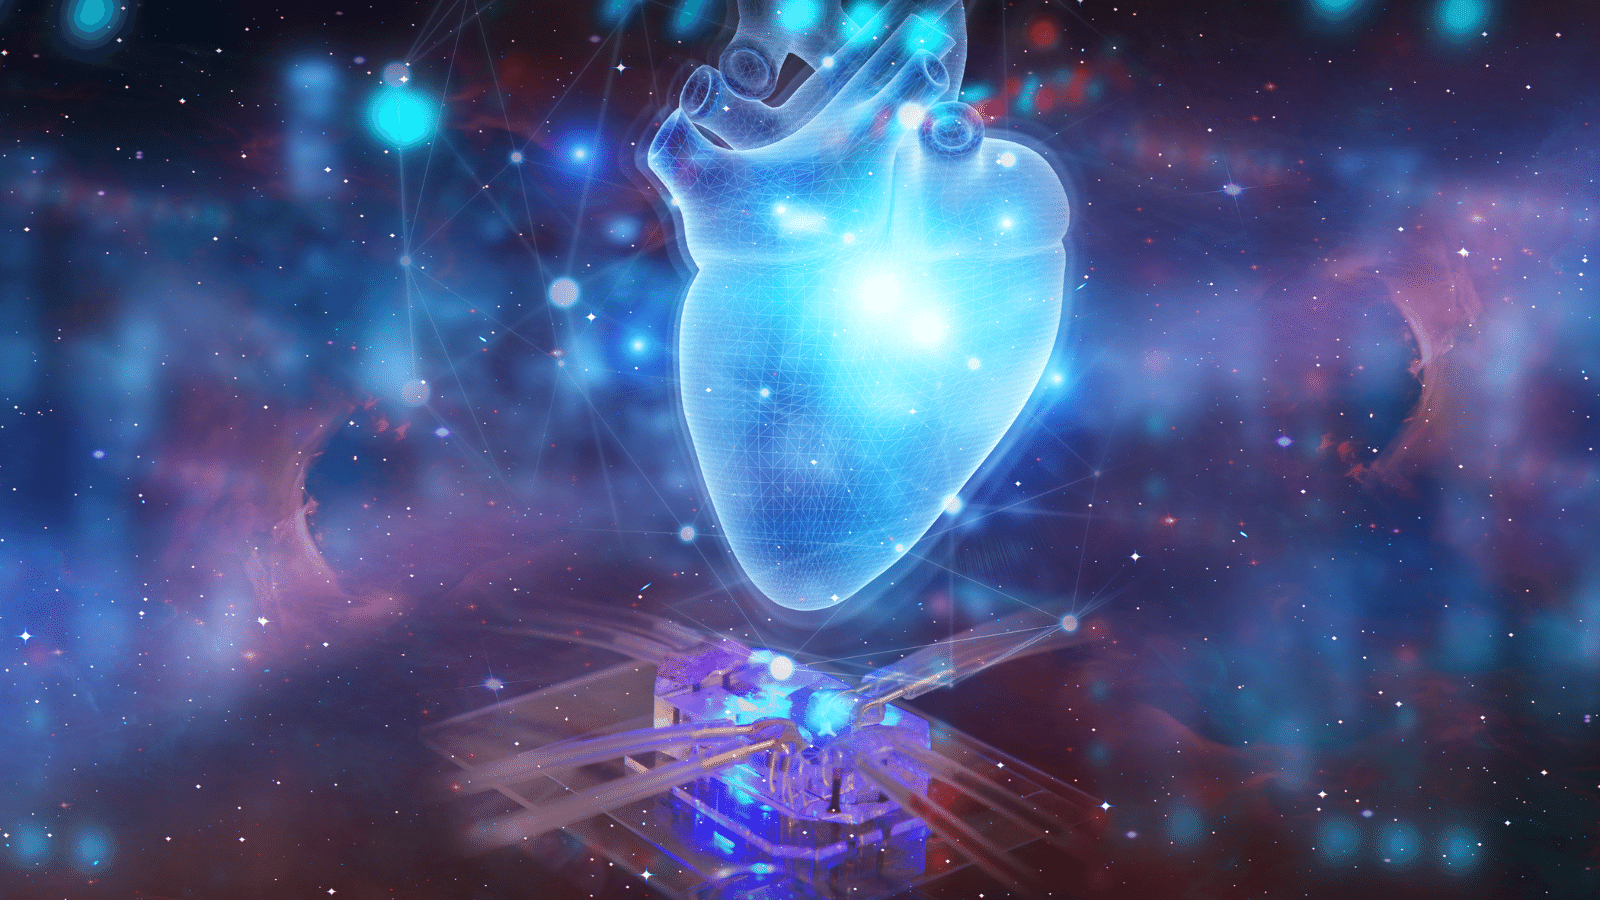 AstroCardia - Belgians send miniature heart into space for ageing research